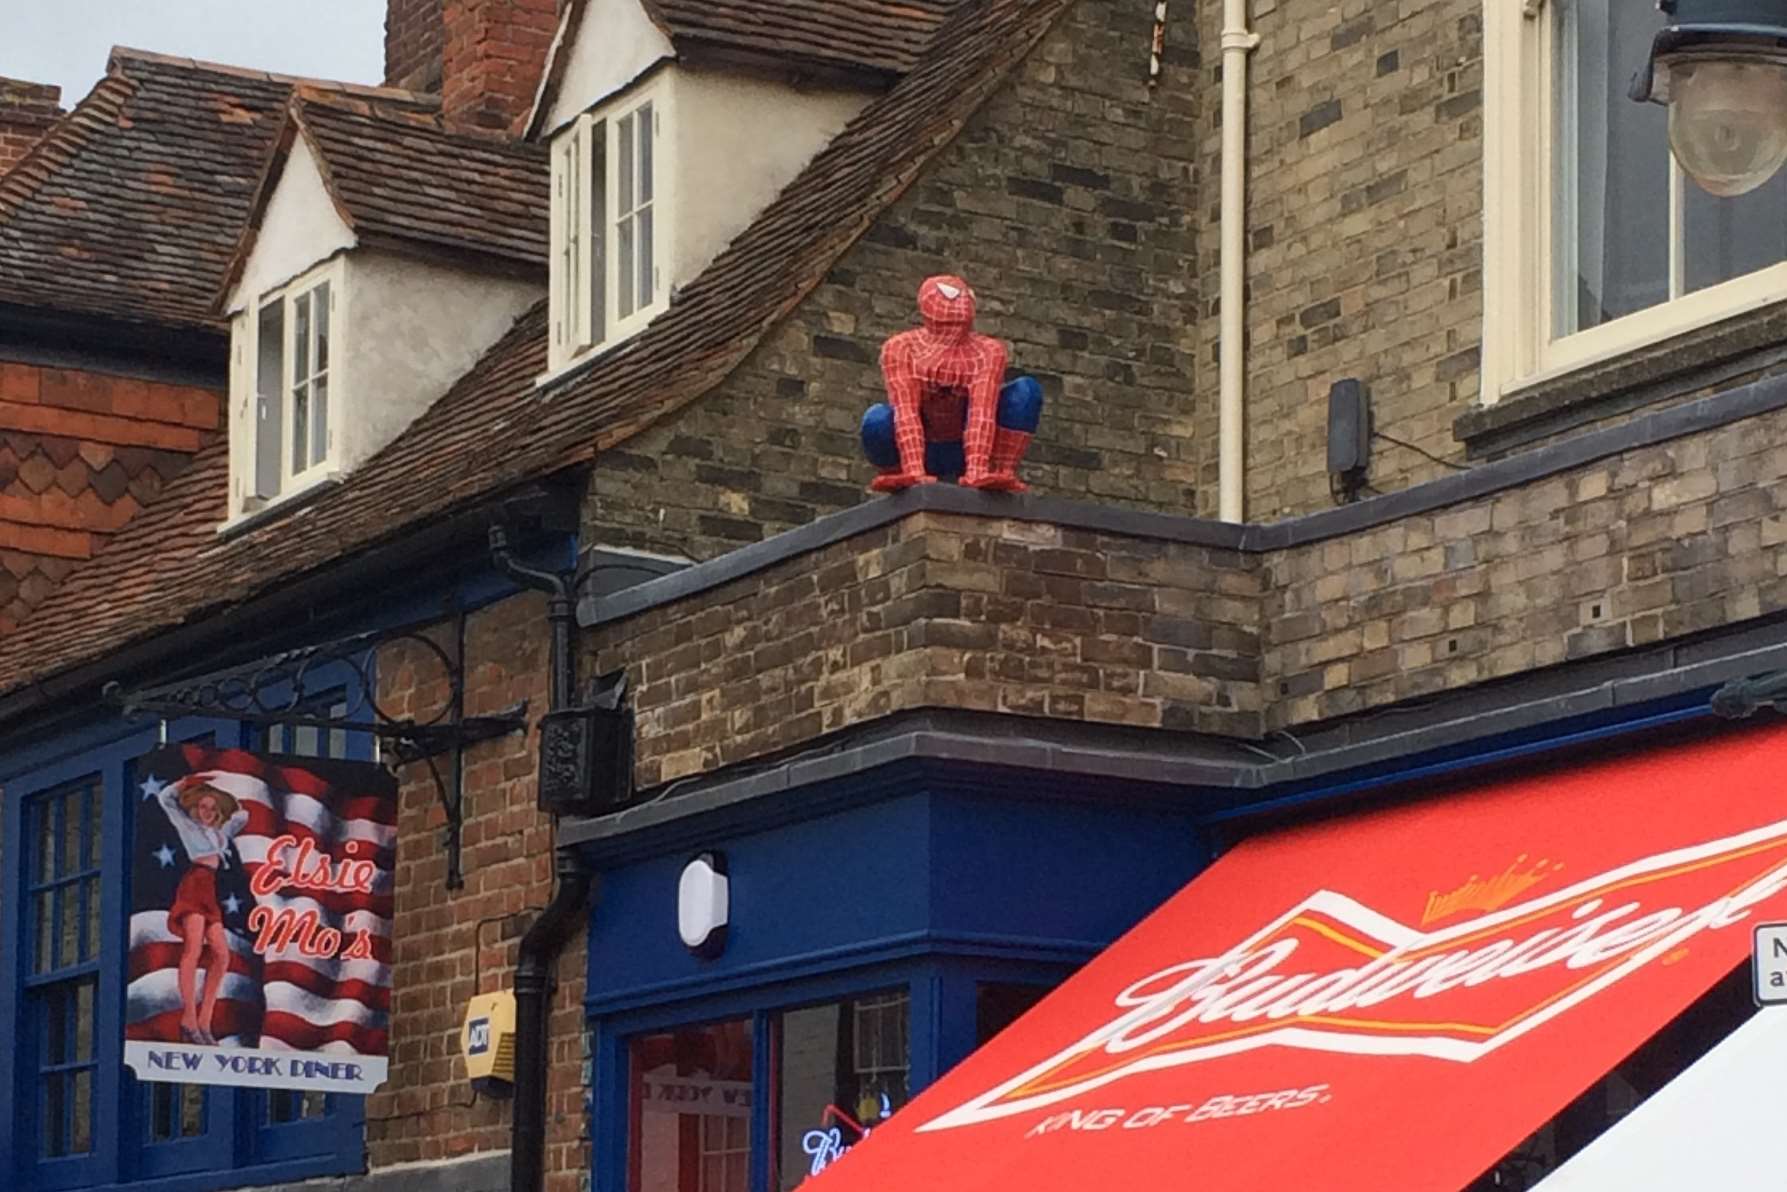 Thieves have stolen the Spiderman figure from Elsie Mo's Diner in Burgate.